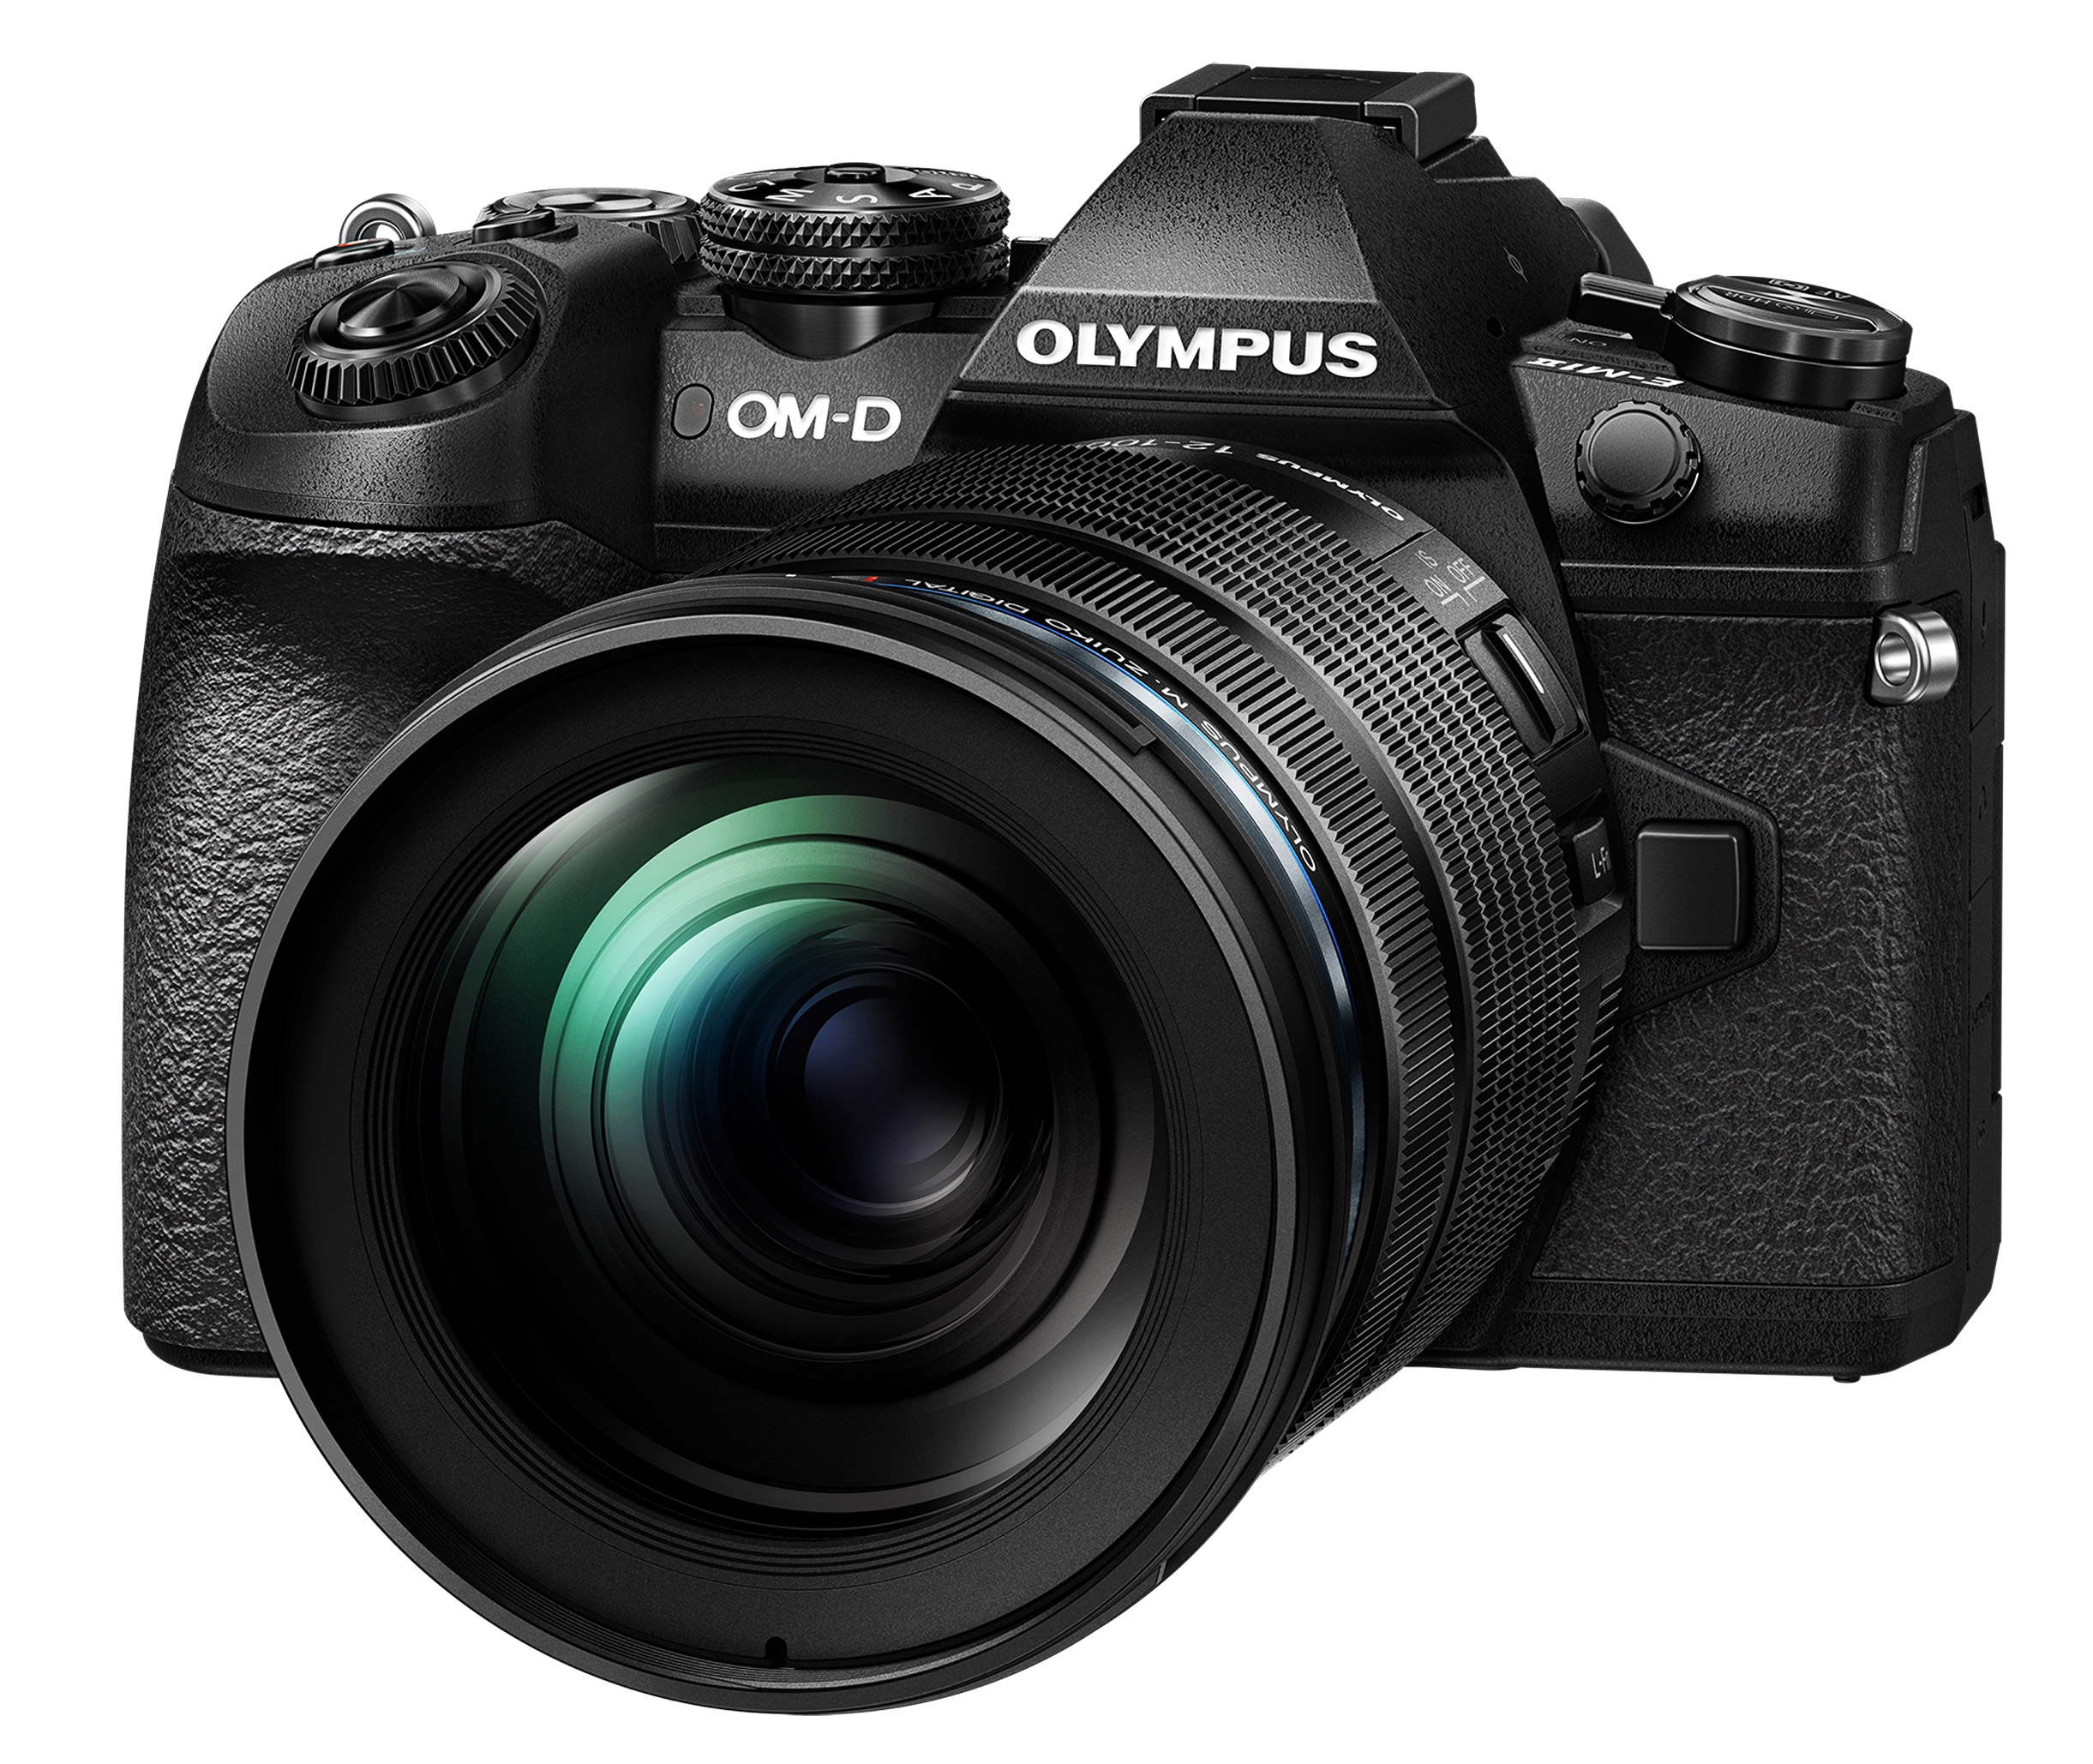 Olympus OM-D E-M1 II : Specifications and Opinions | JuzaPhoto